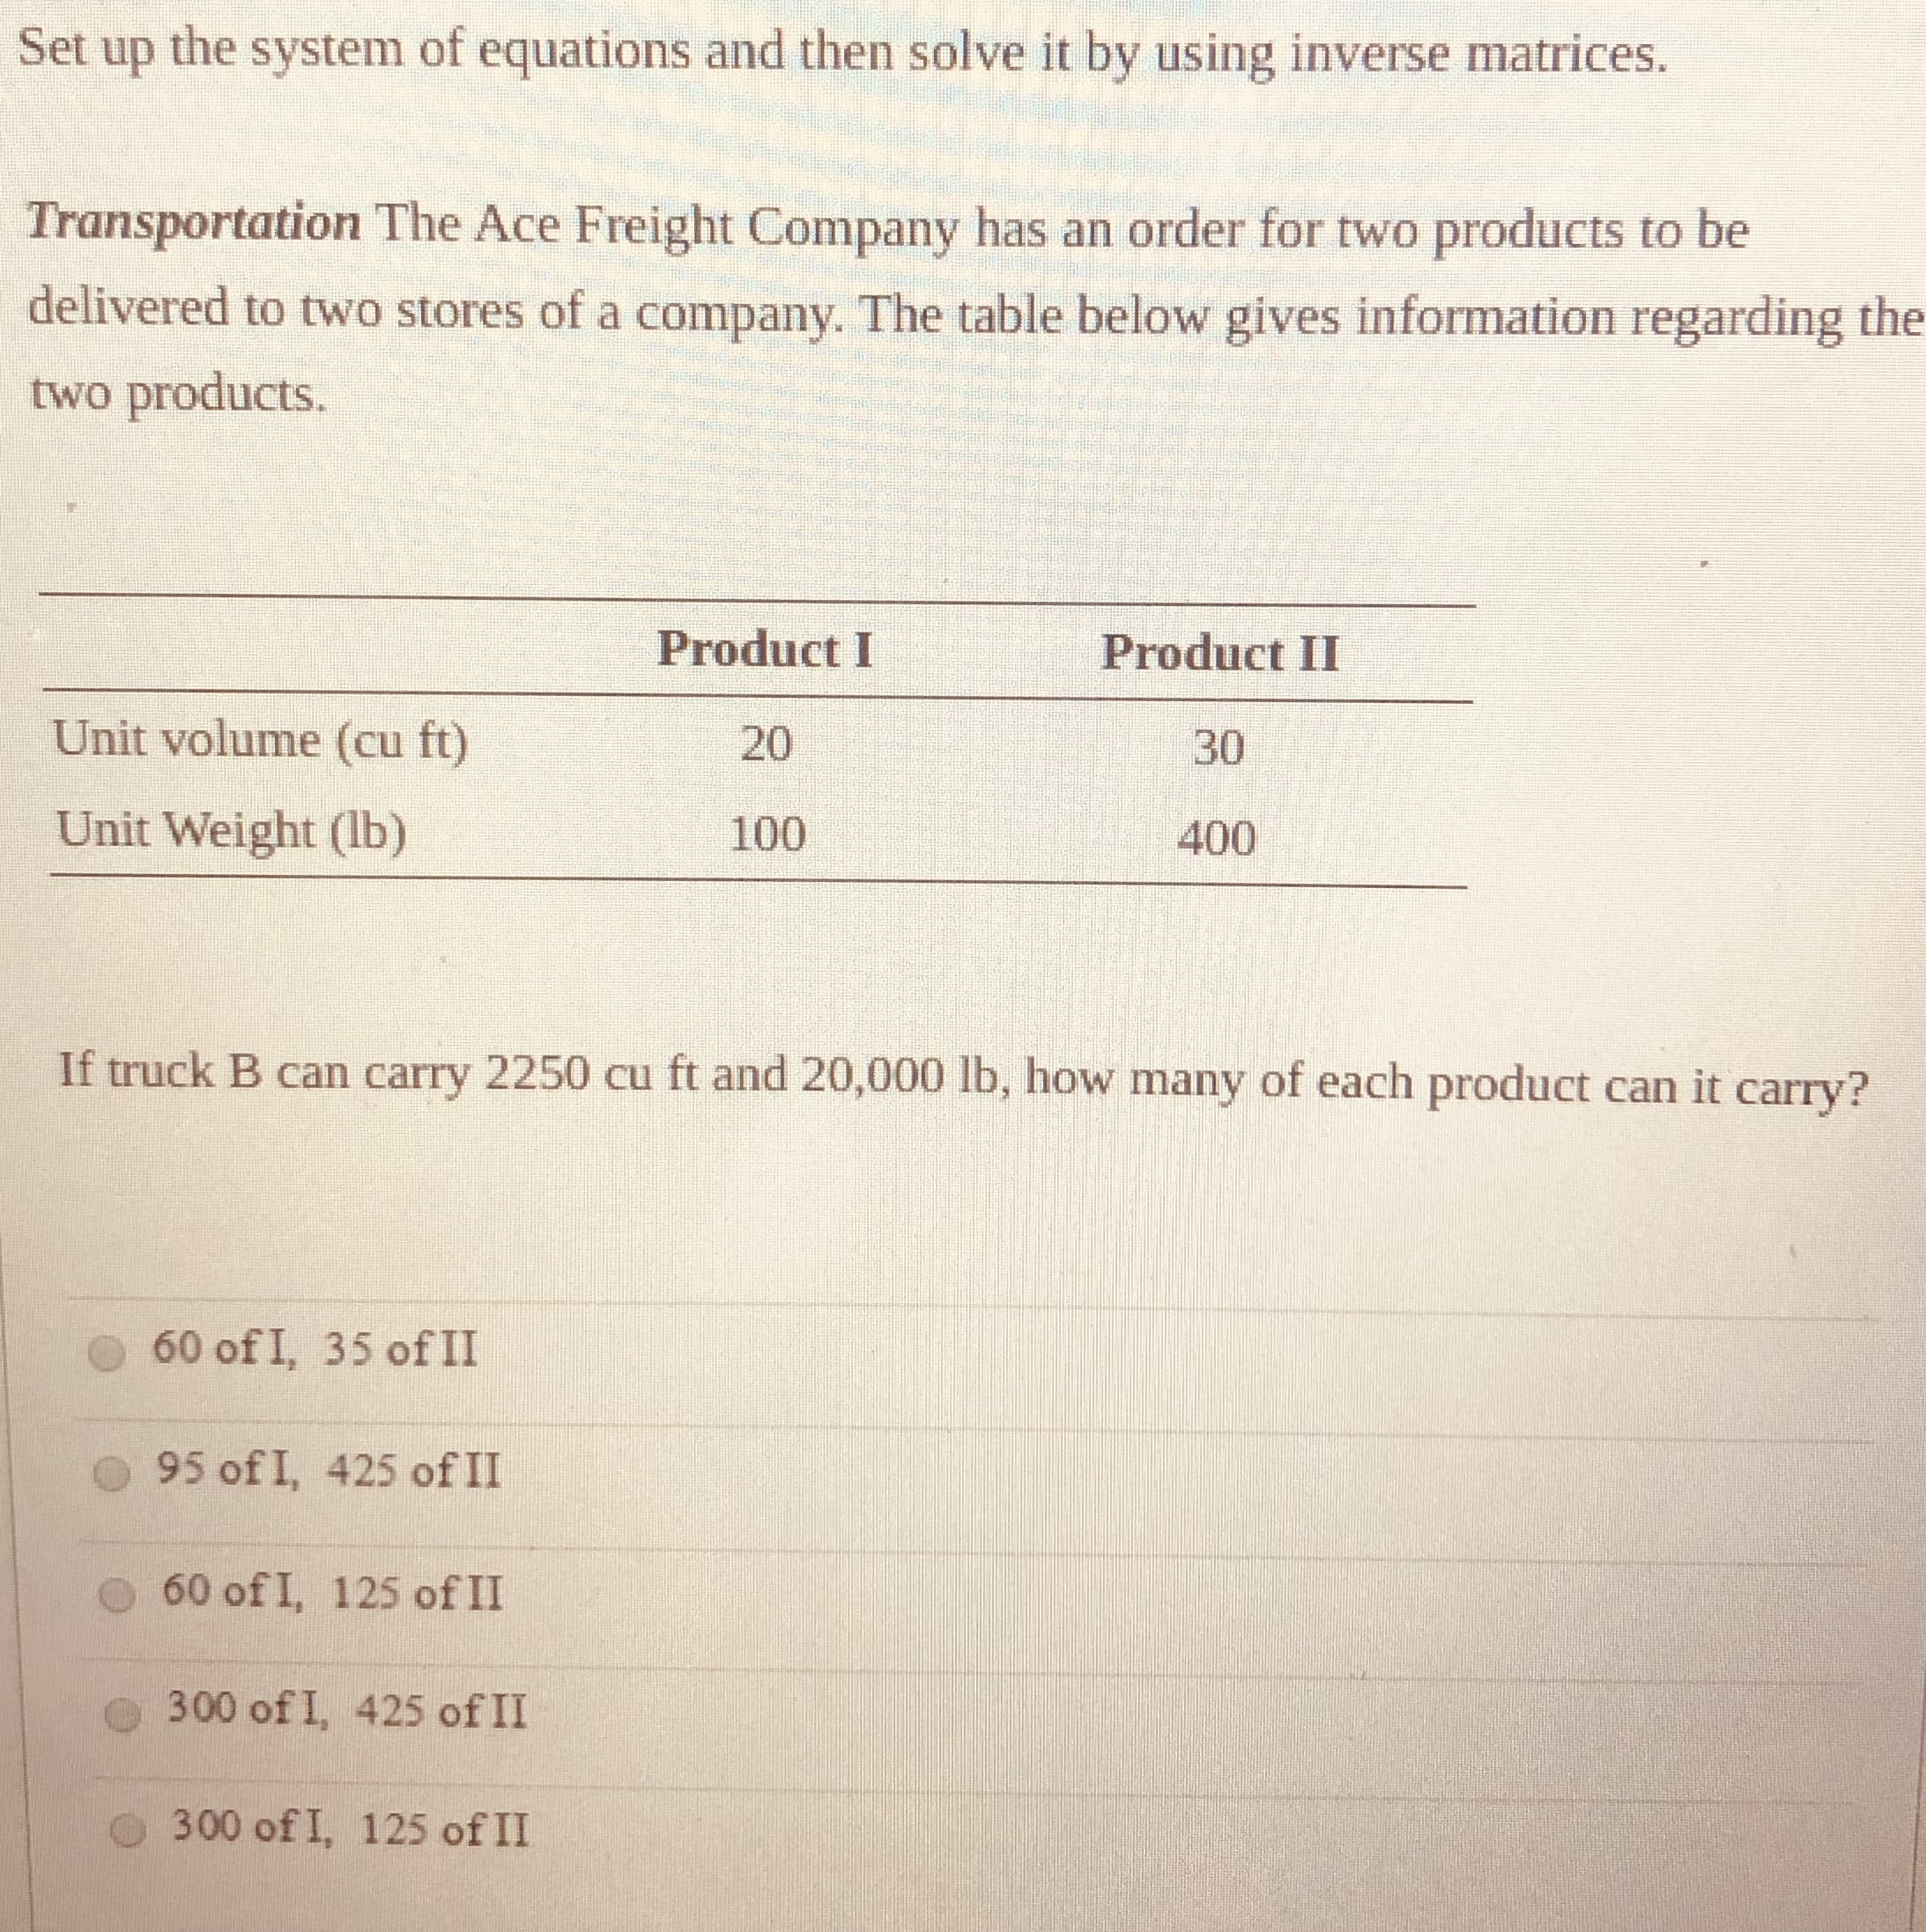 Set up the system of equations and then solve it by using inverse matrices.
Transportation The Ace Freight Company has an order for two products to be
delivered to two stores of a company. The table below gives information regarding the
two products.
Product I
Product II
Unit volume (cu ft)
20
30
Unit Weight (lb)
100
400
If truck B can carry 2250 cu ft and 20,000 lb, how many of each product can it carry?
